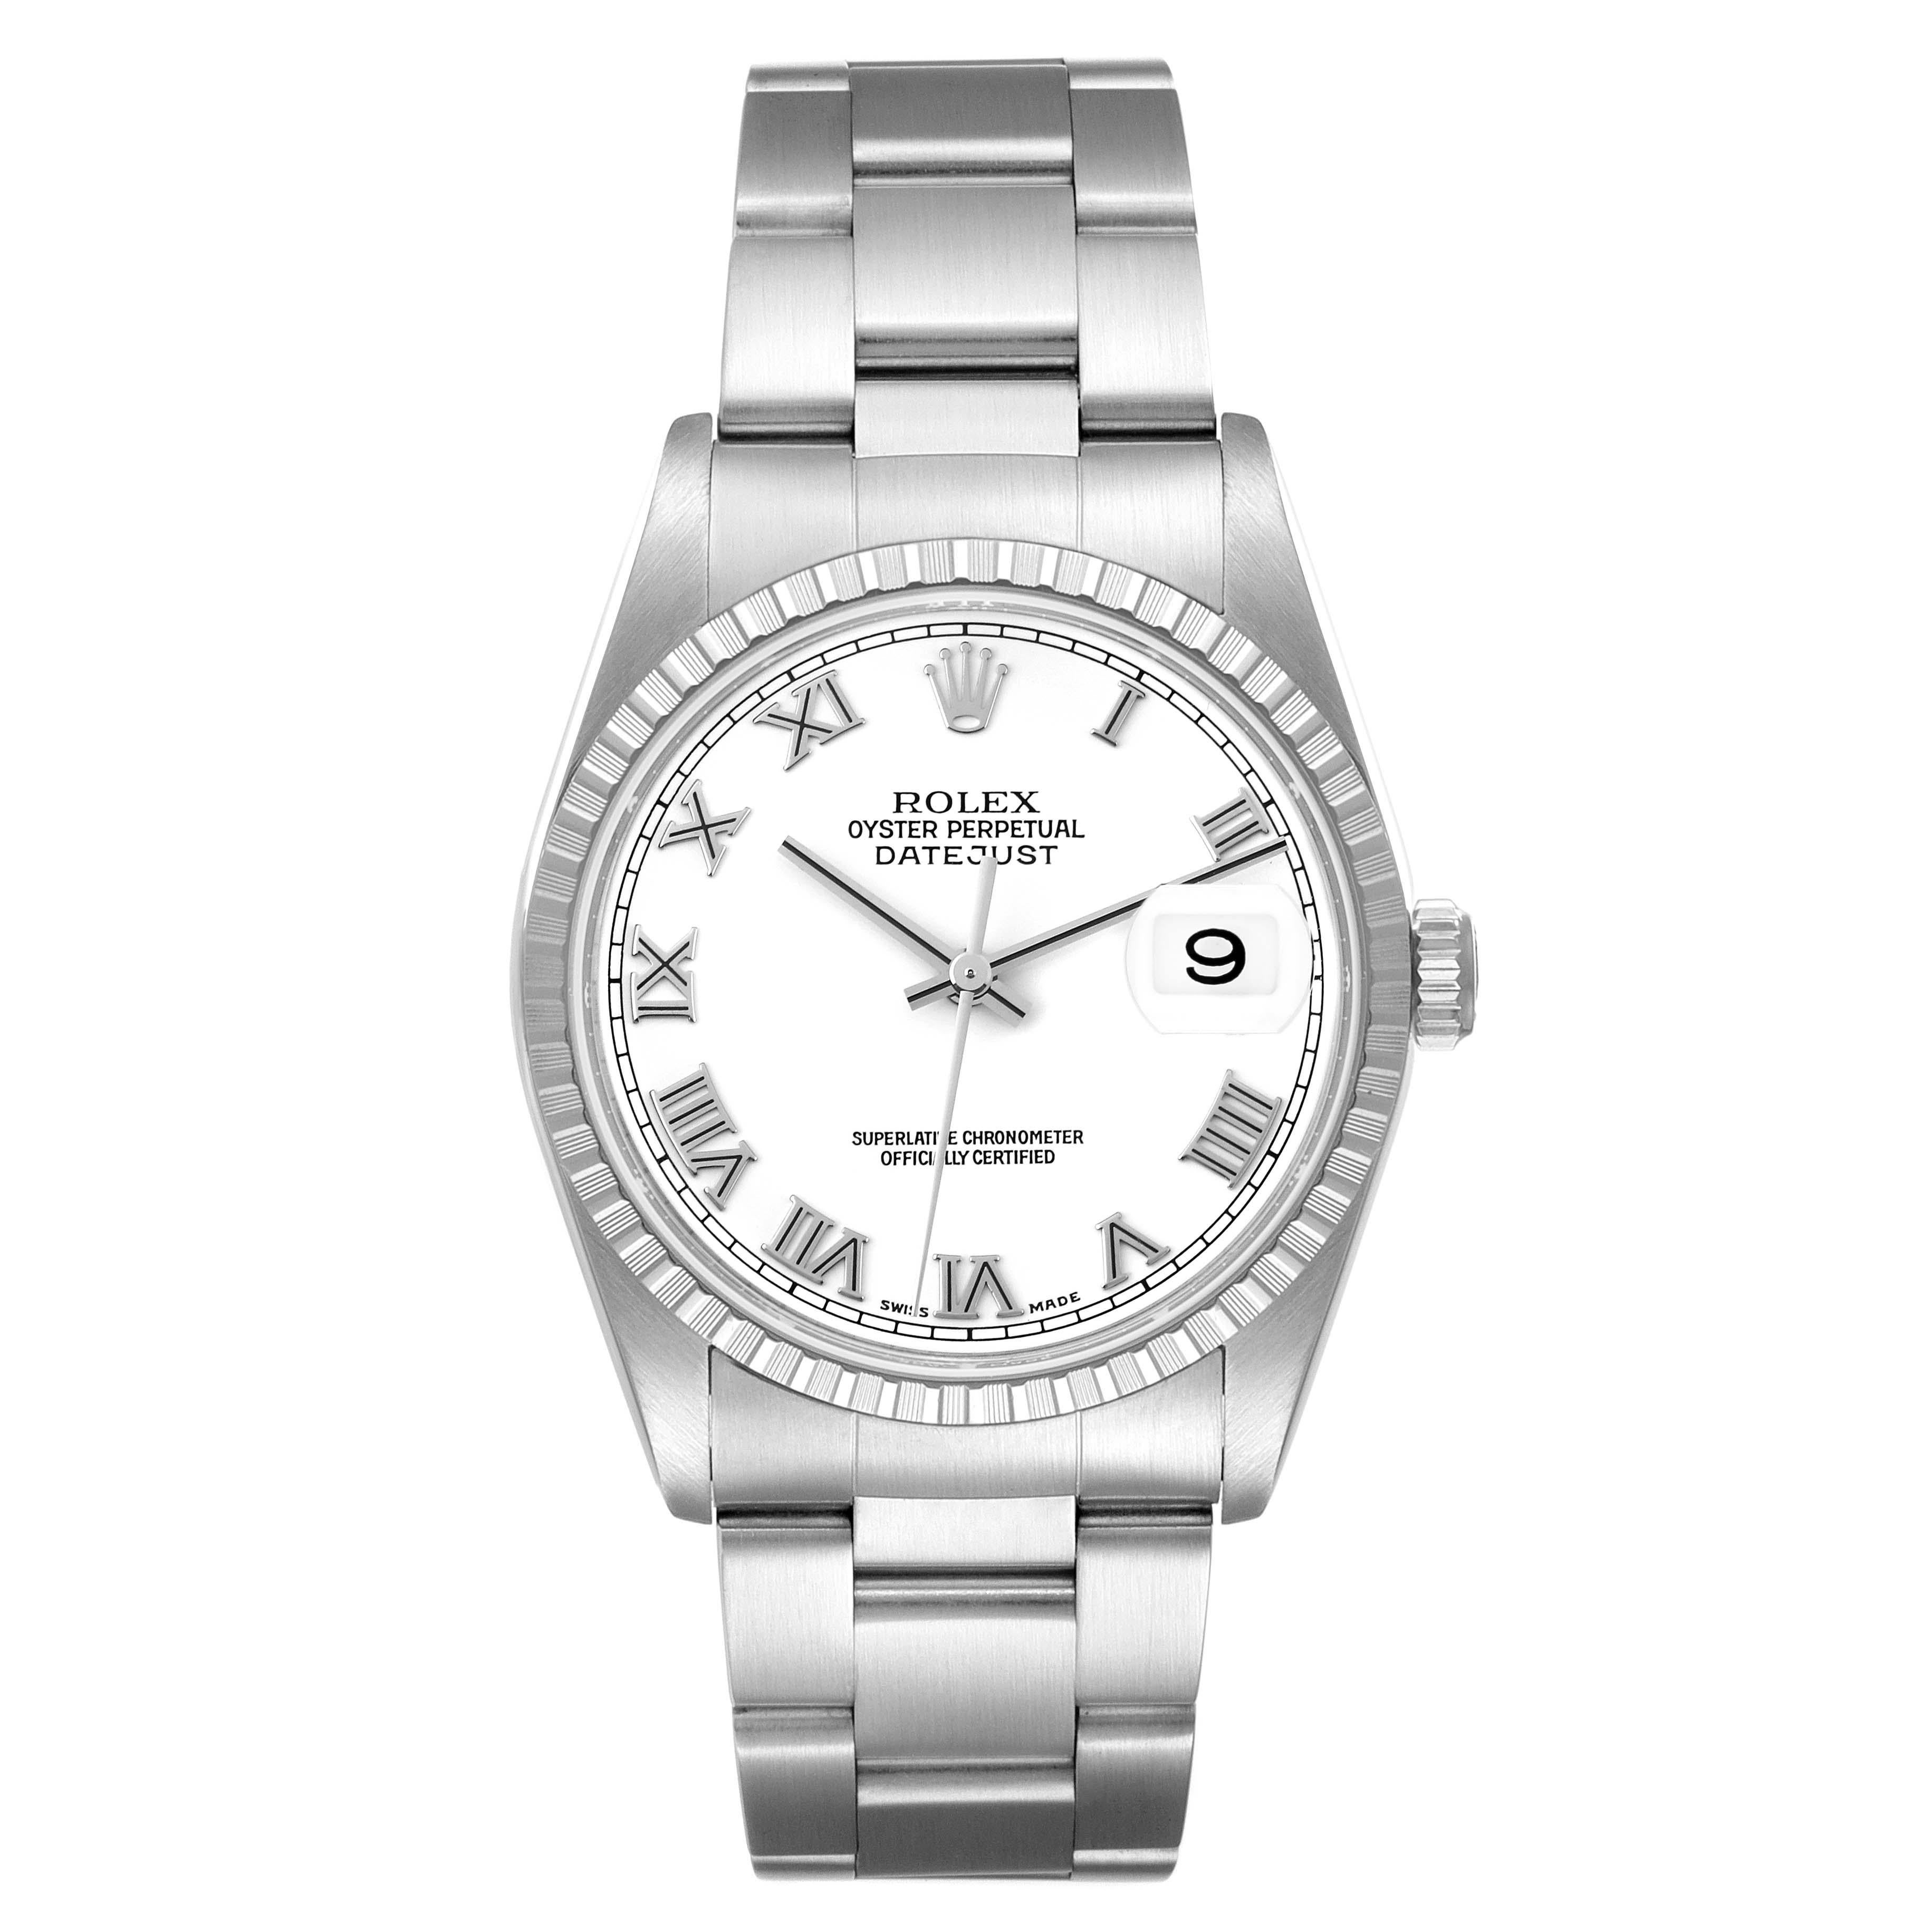 Rolex Datejust 36 White Roman Dial Steel Mens Watch 16220 Box Papers. Officially certified chronometer self-winding movement. Stainless steel oyster case 36.0 mm in diameter. Rolex logo on a crown. Stainless steel engine turned bezel. Scratch